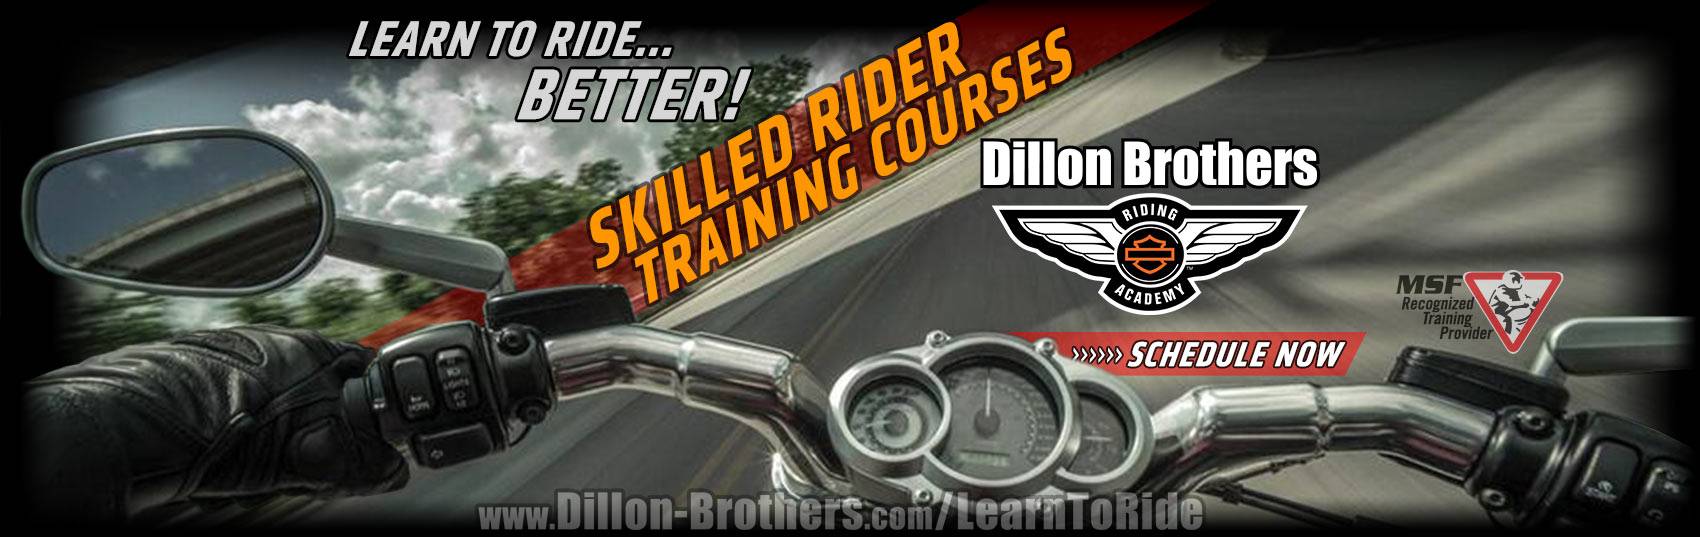 Skilled Rider Course